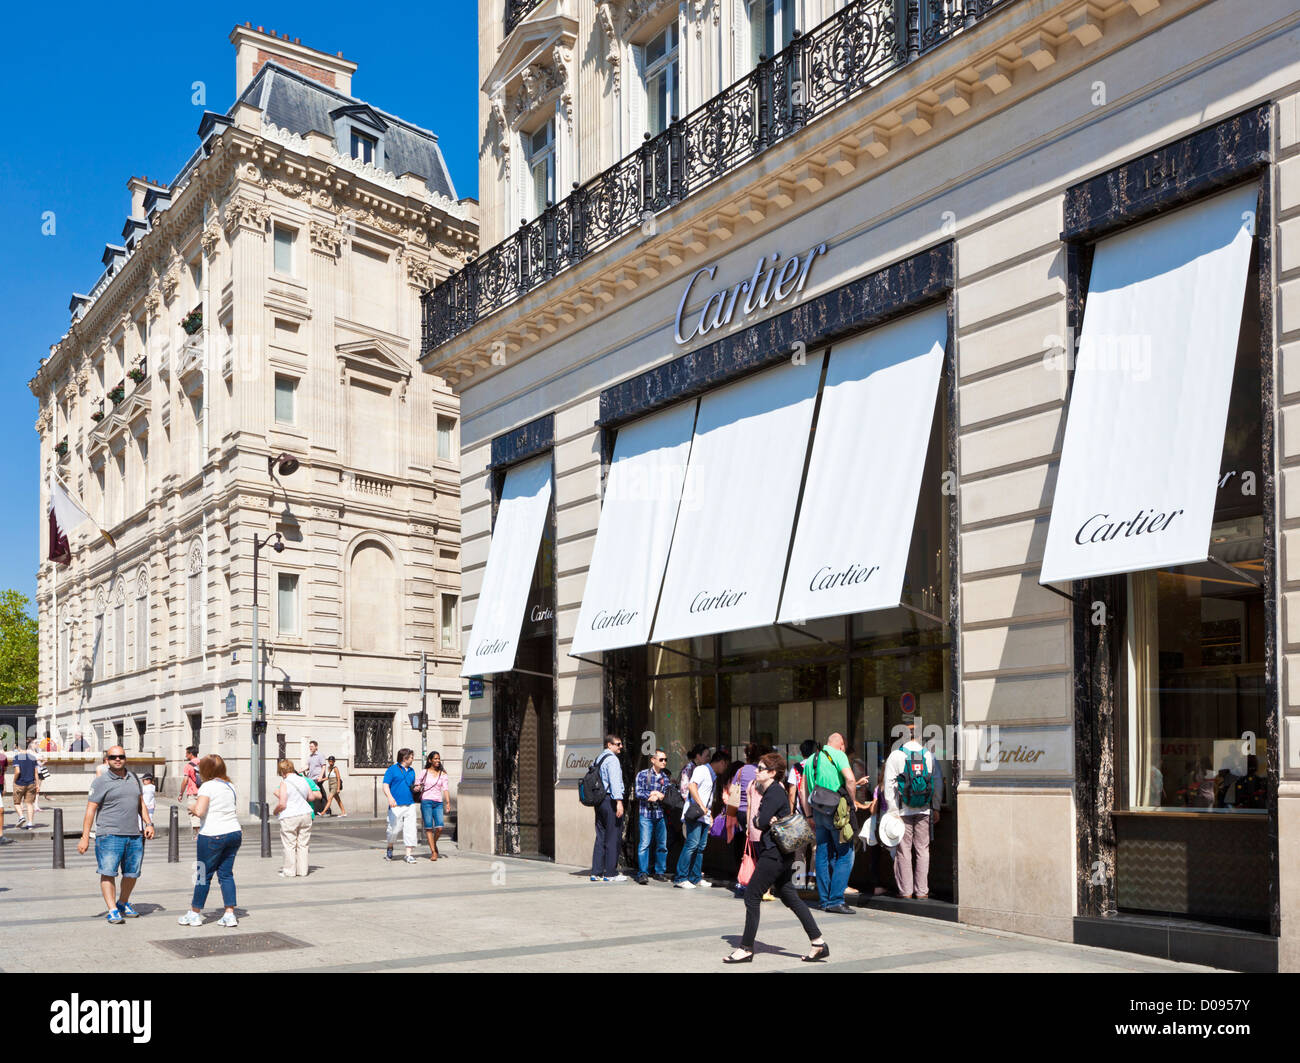 People window shopping at Cartier on the famous shopping street the Avenue des Champs Elysees Paris France EU Europe Stock Photo